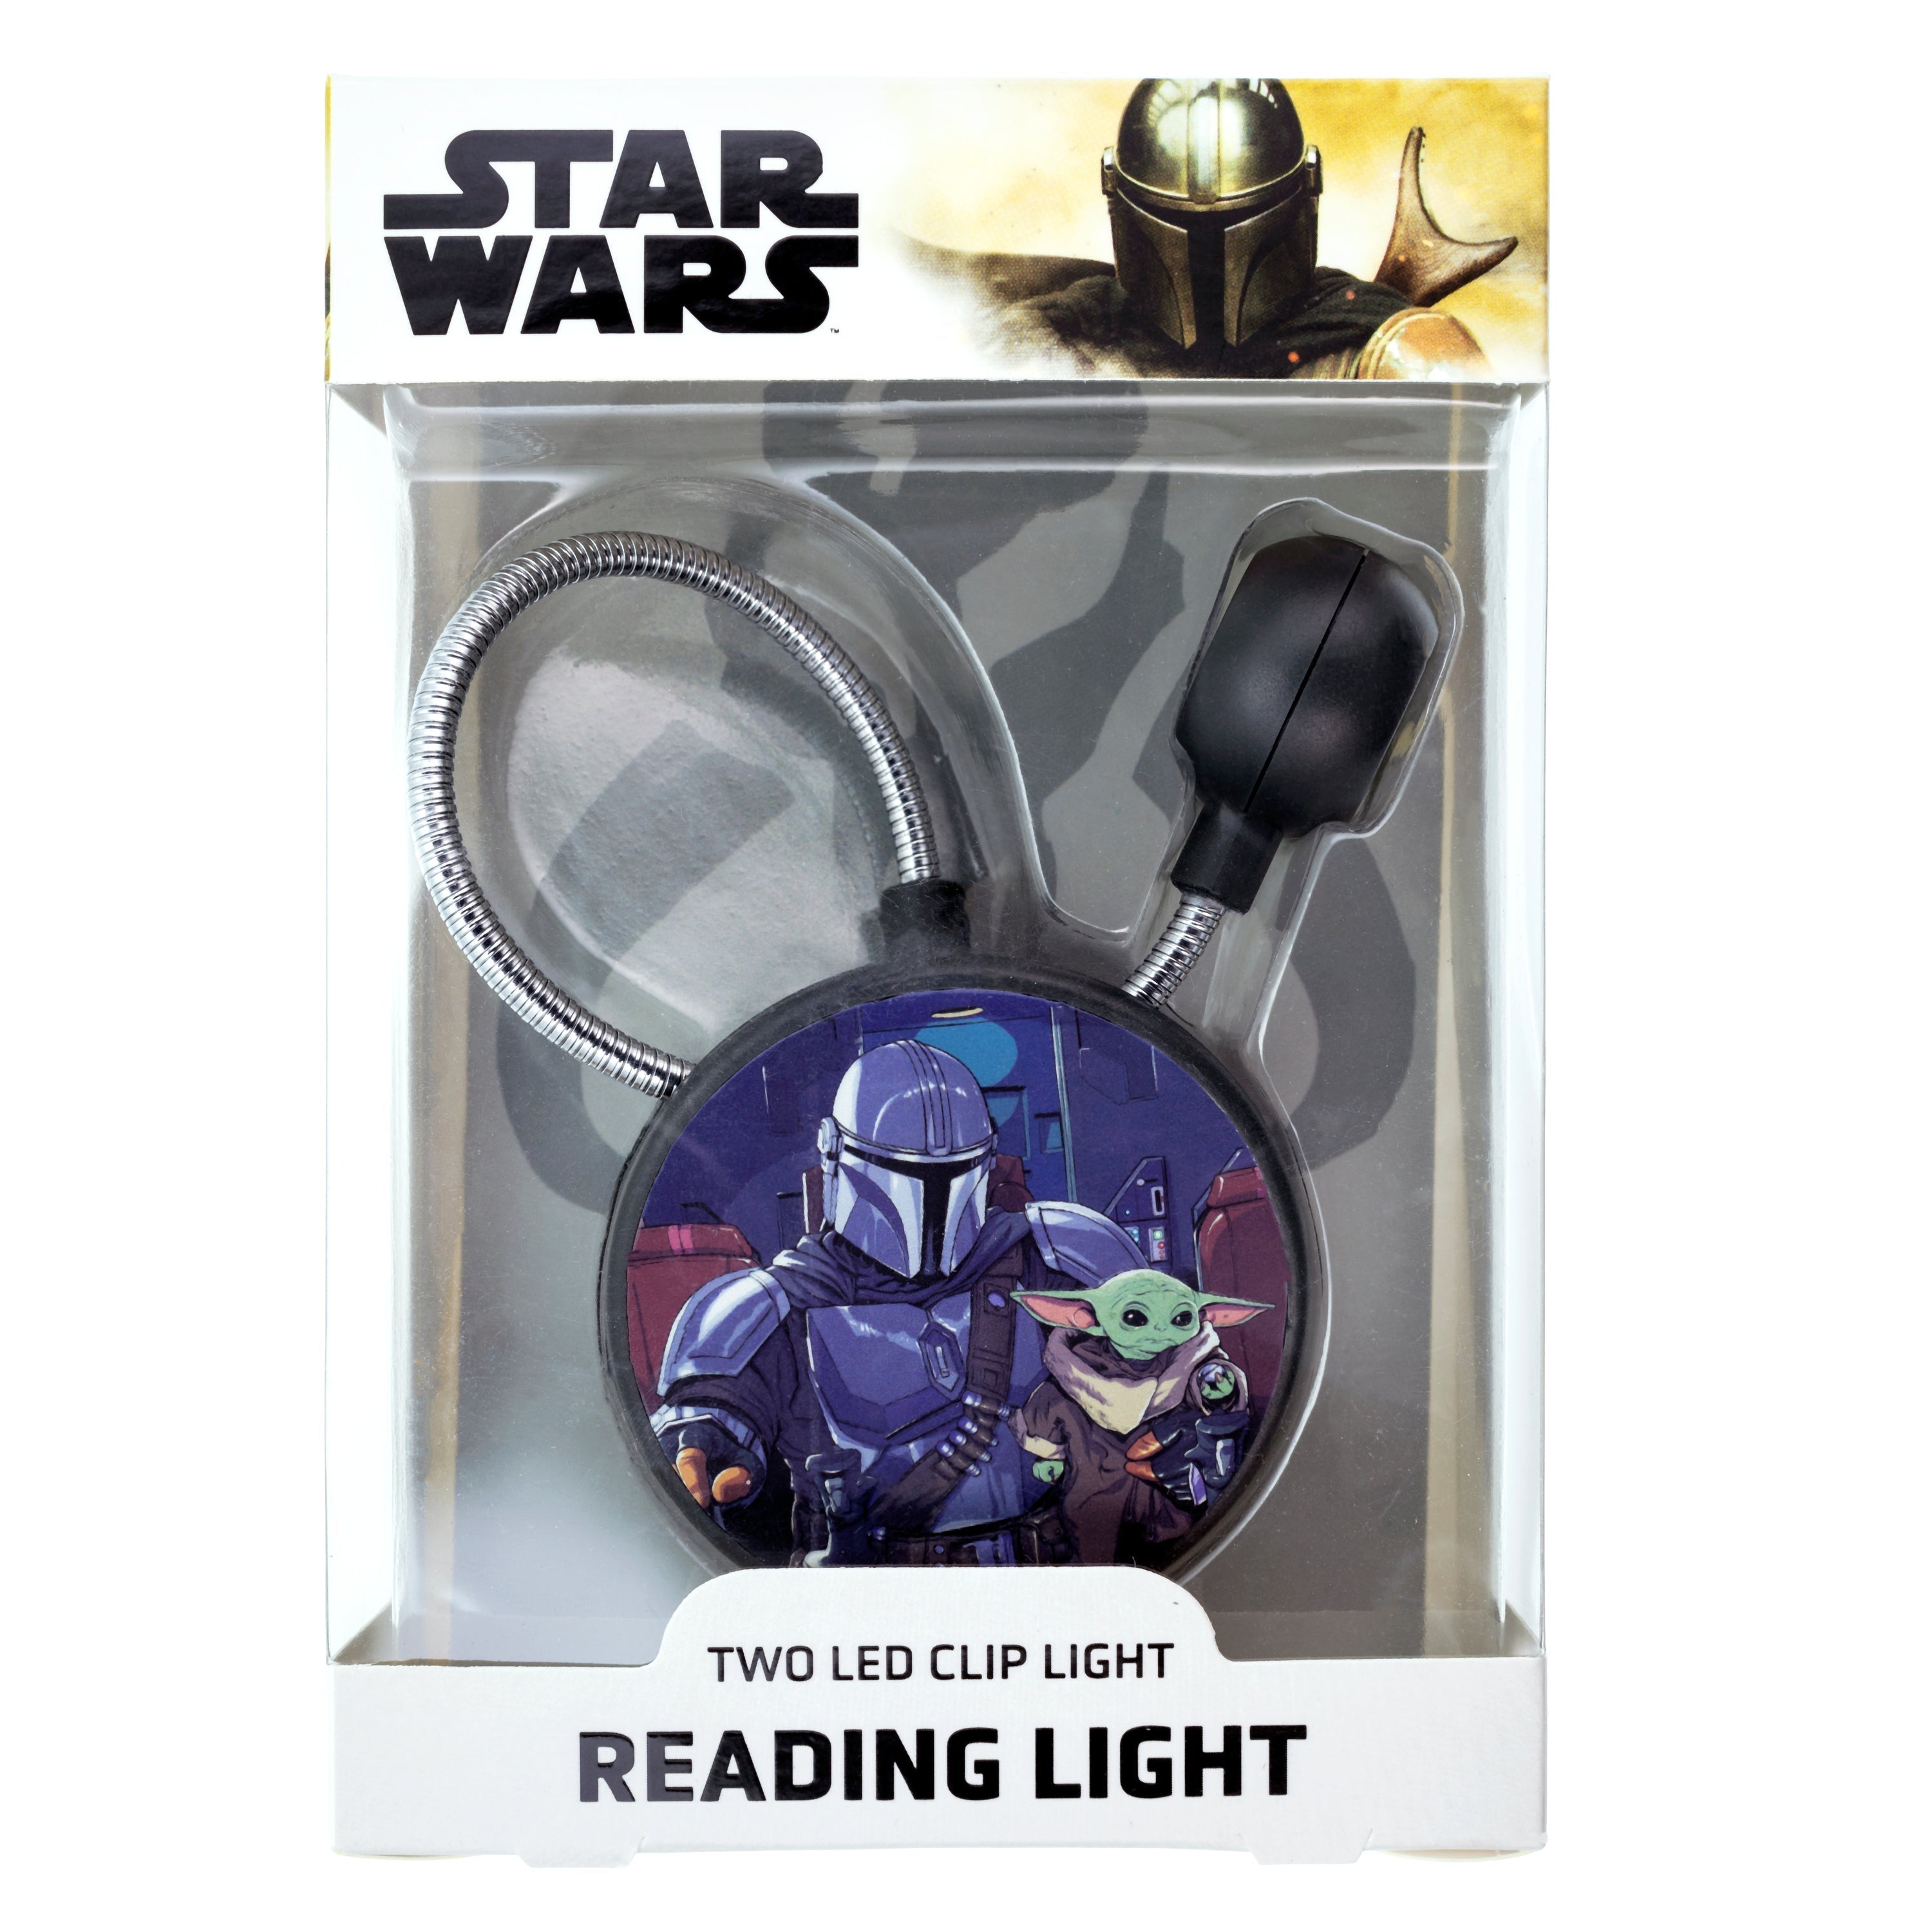 Star Wars LED Dimmable Reading Light